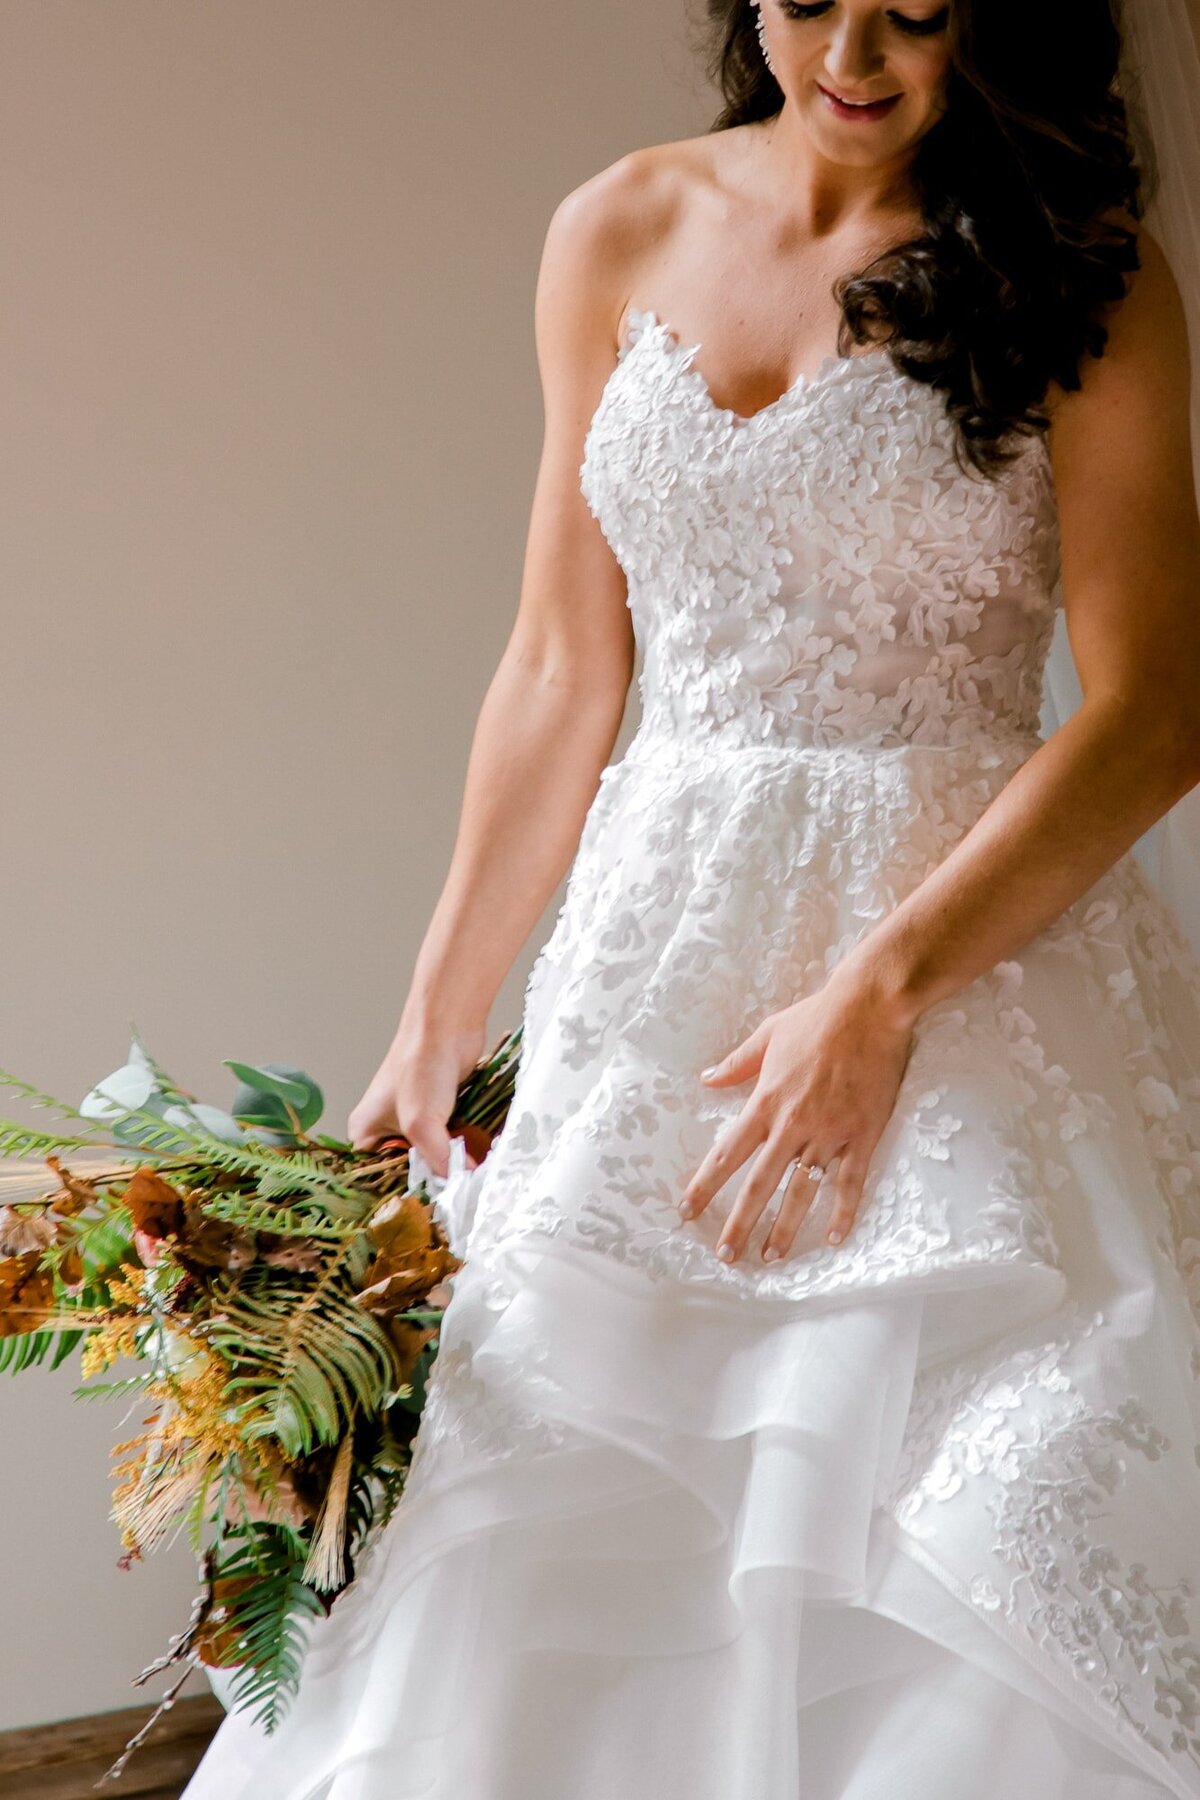 Bride in lace ballgown holding an organic bouquet